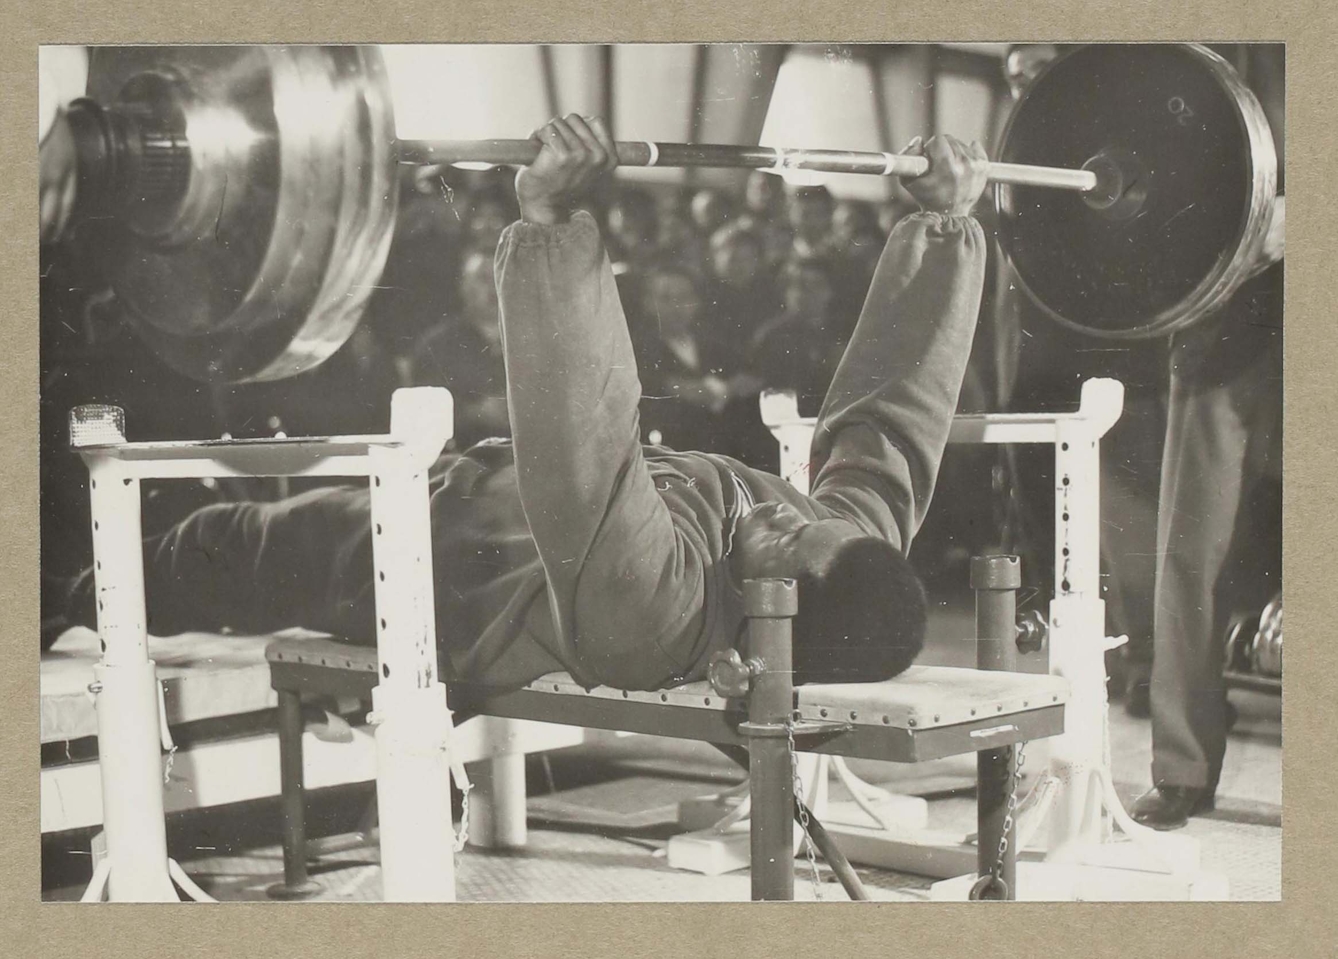 Black and white photographic print showing a black man on a weightlifting bench holding a large barbell above him with straight arms and clenched fists. A leg of a spotter or observer is just visible to the right, and behind the barbell and the weightlifter are an audience whose blurred faces lean forward, focusing on the competitor.